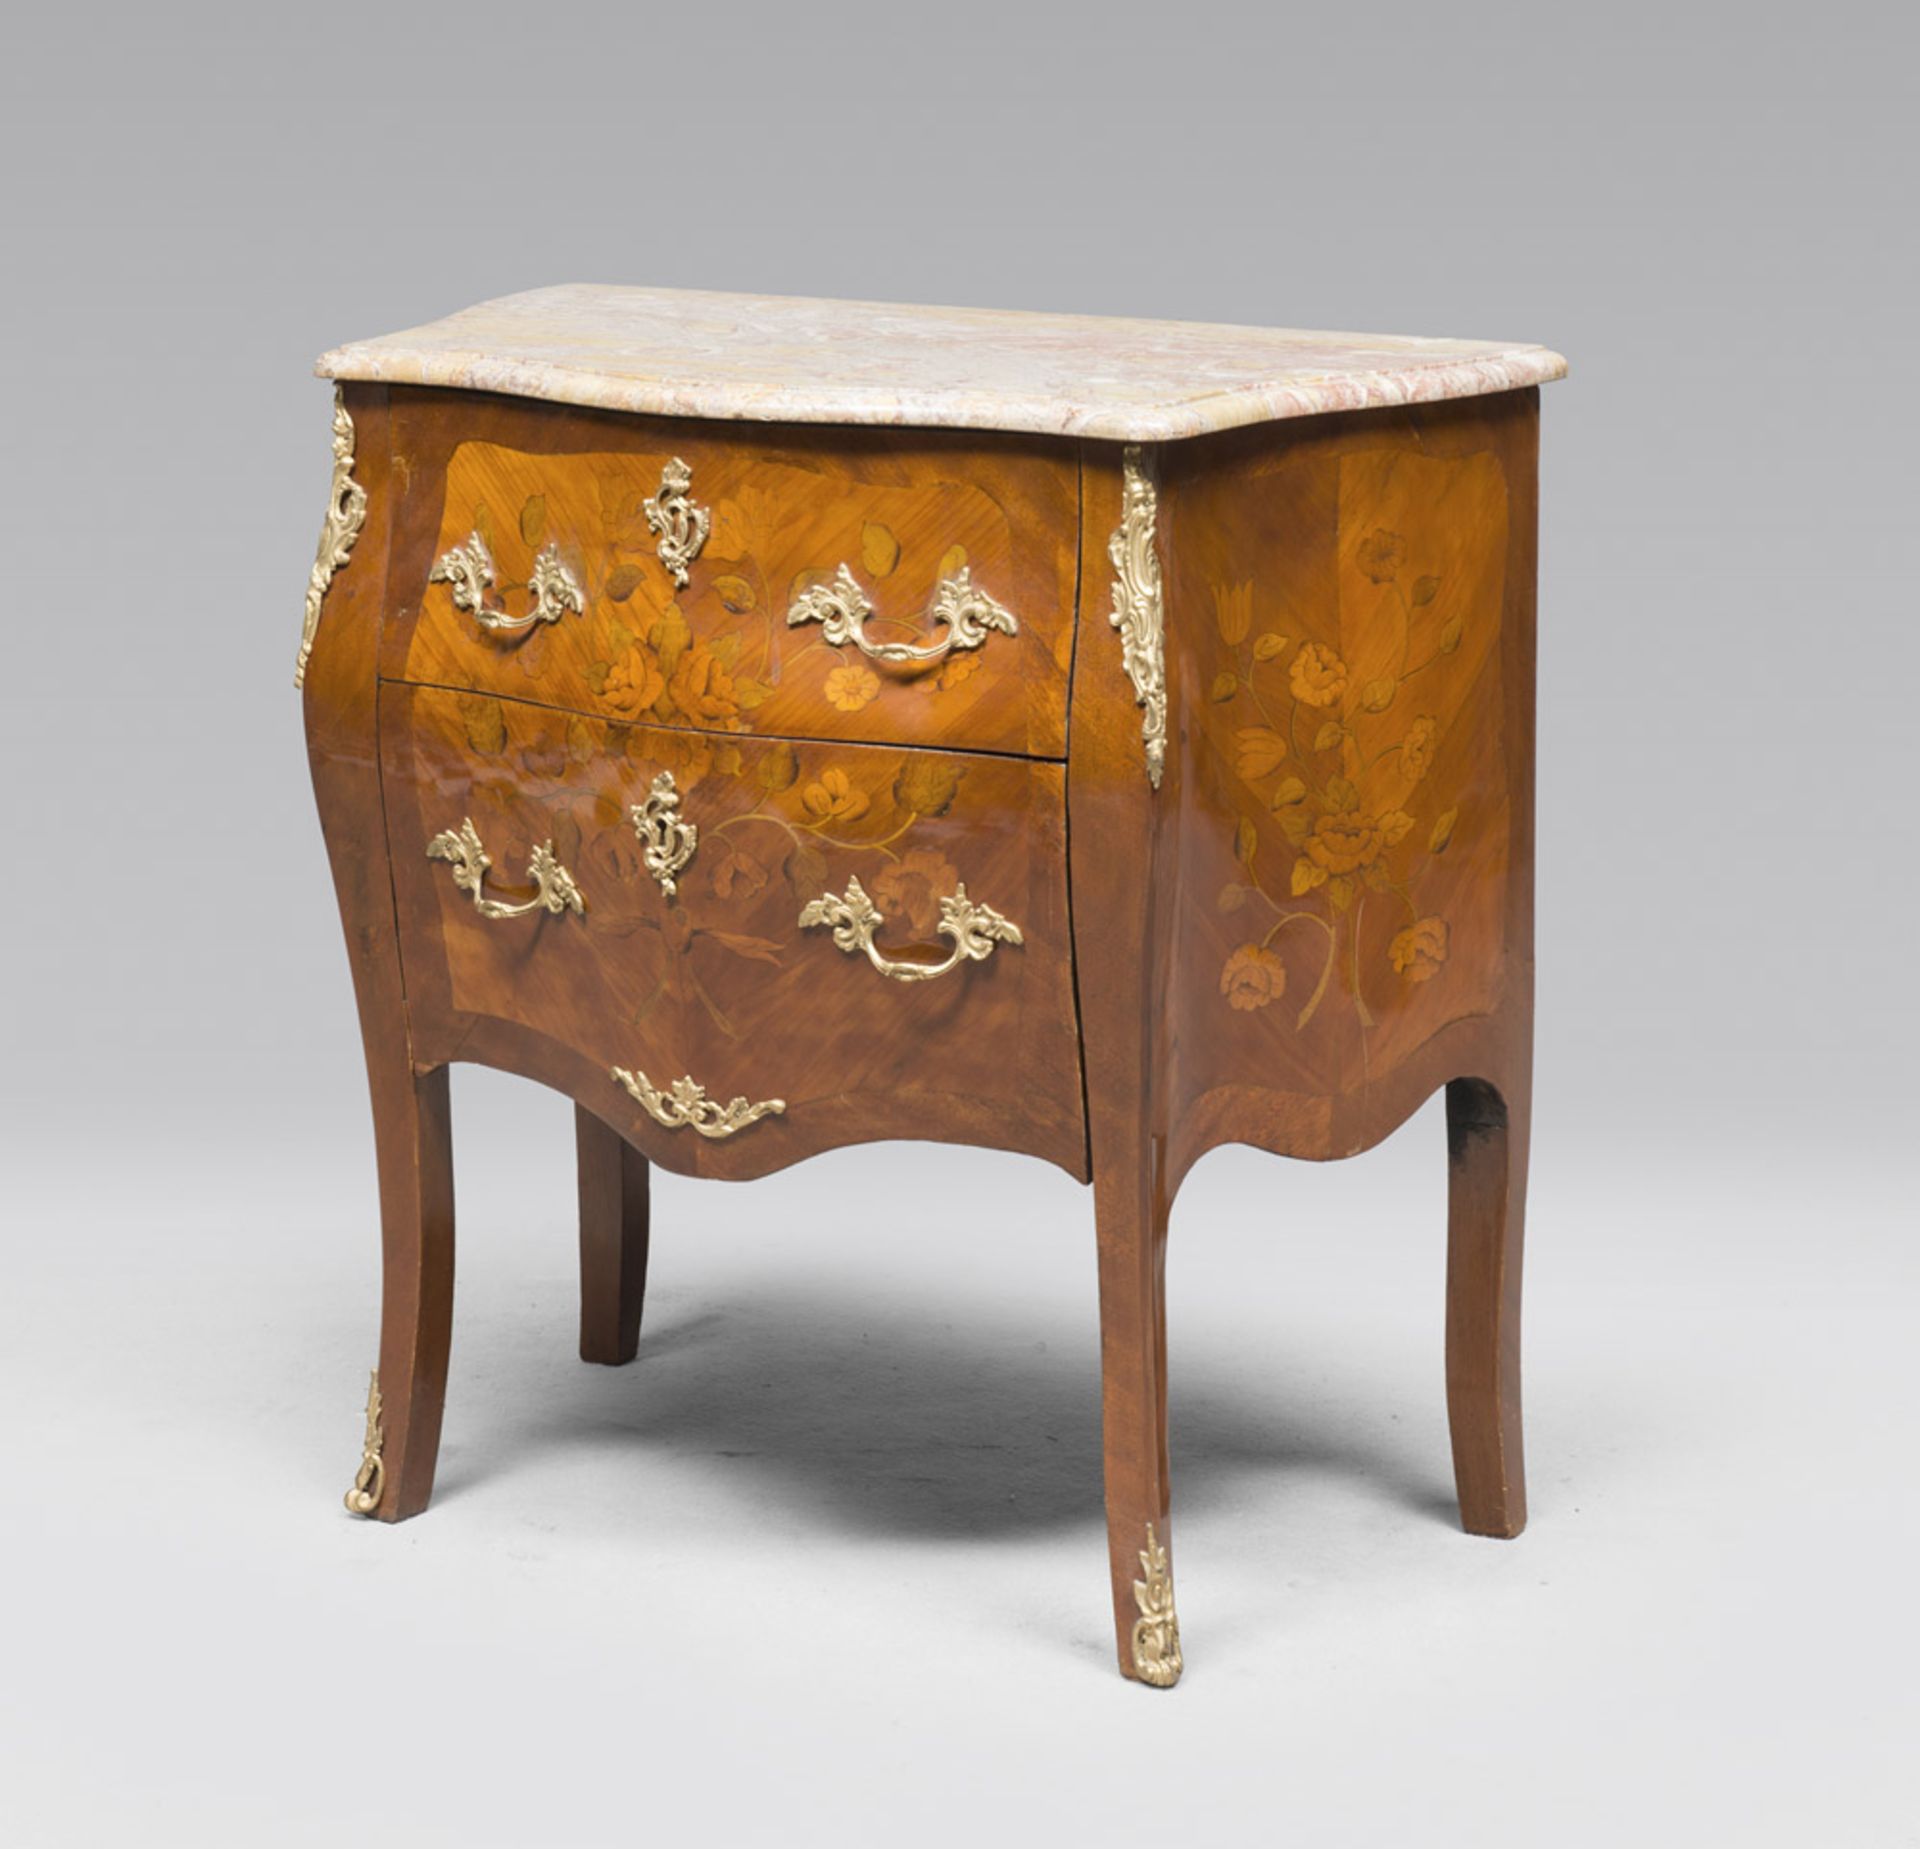 A SMALL BOIS DE ROSE COMMODE, FRANCE ANTIQUE ELEMENTS With a yellow lumachino marble top and a two-